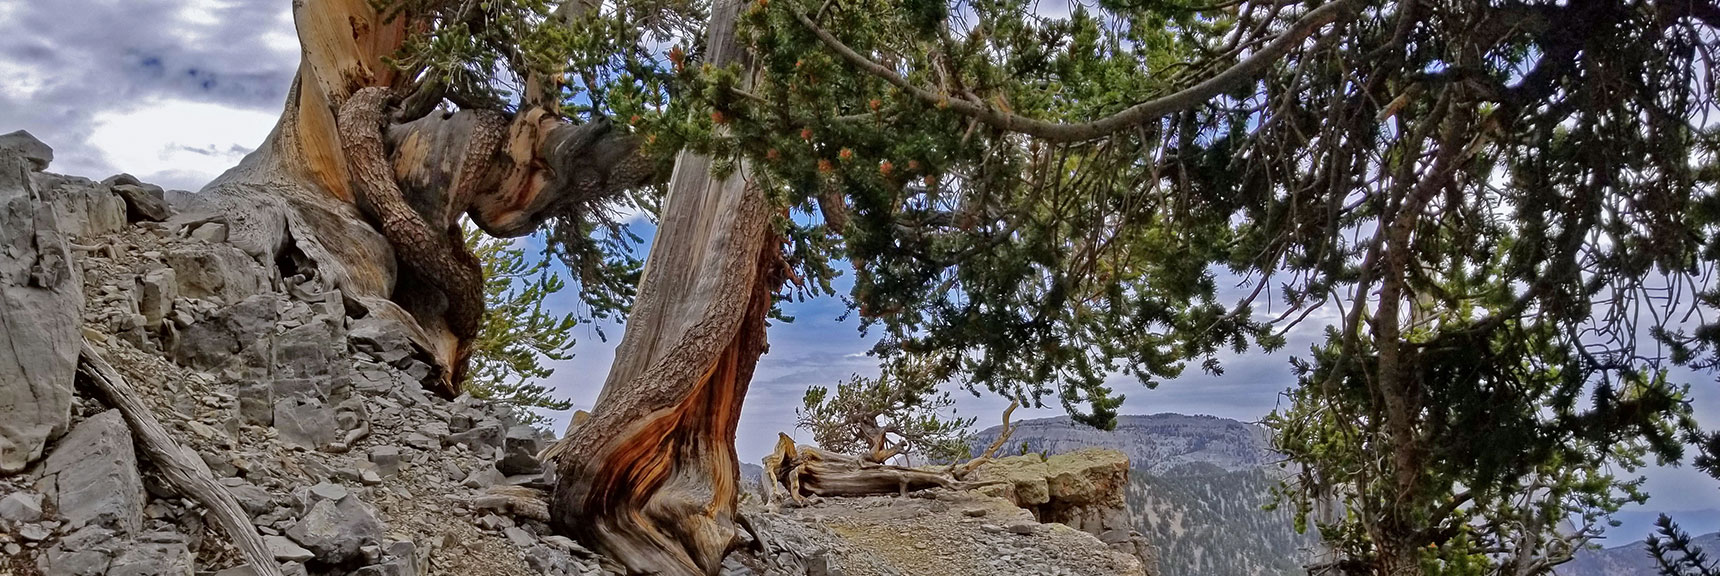 More Bristlecone Pine Natural Sculptures and a Plateau Viewpoint | Lee and Charleston Peaks via Lee Canyon Mid Ridge | Mt Charleston Wilderness | Spring Mountains, Nevada